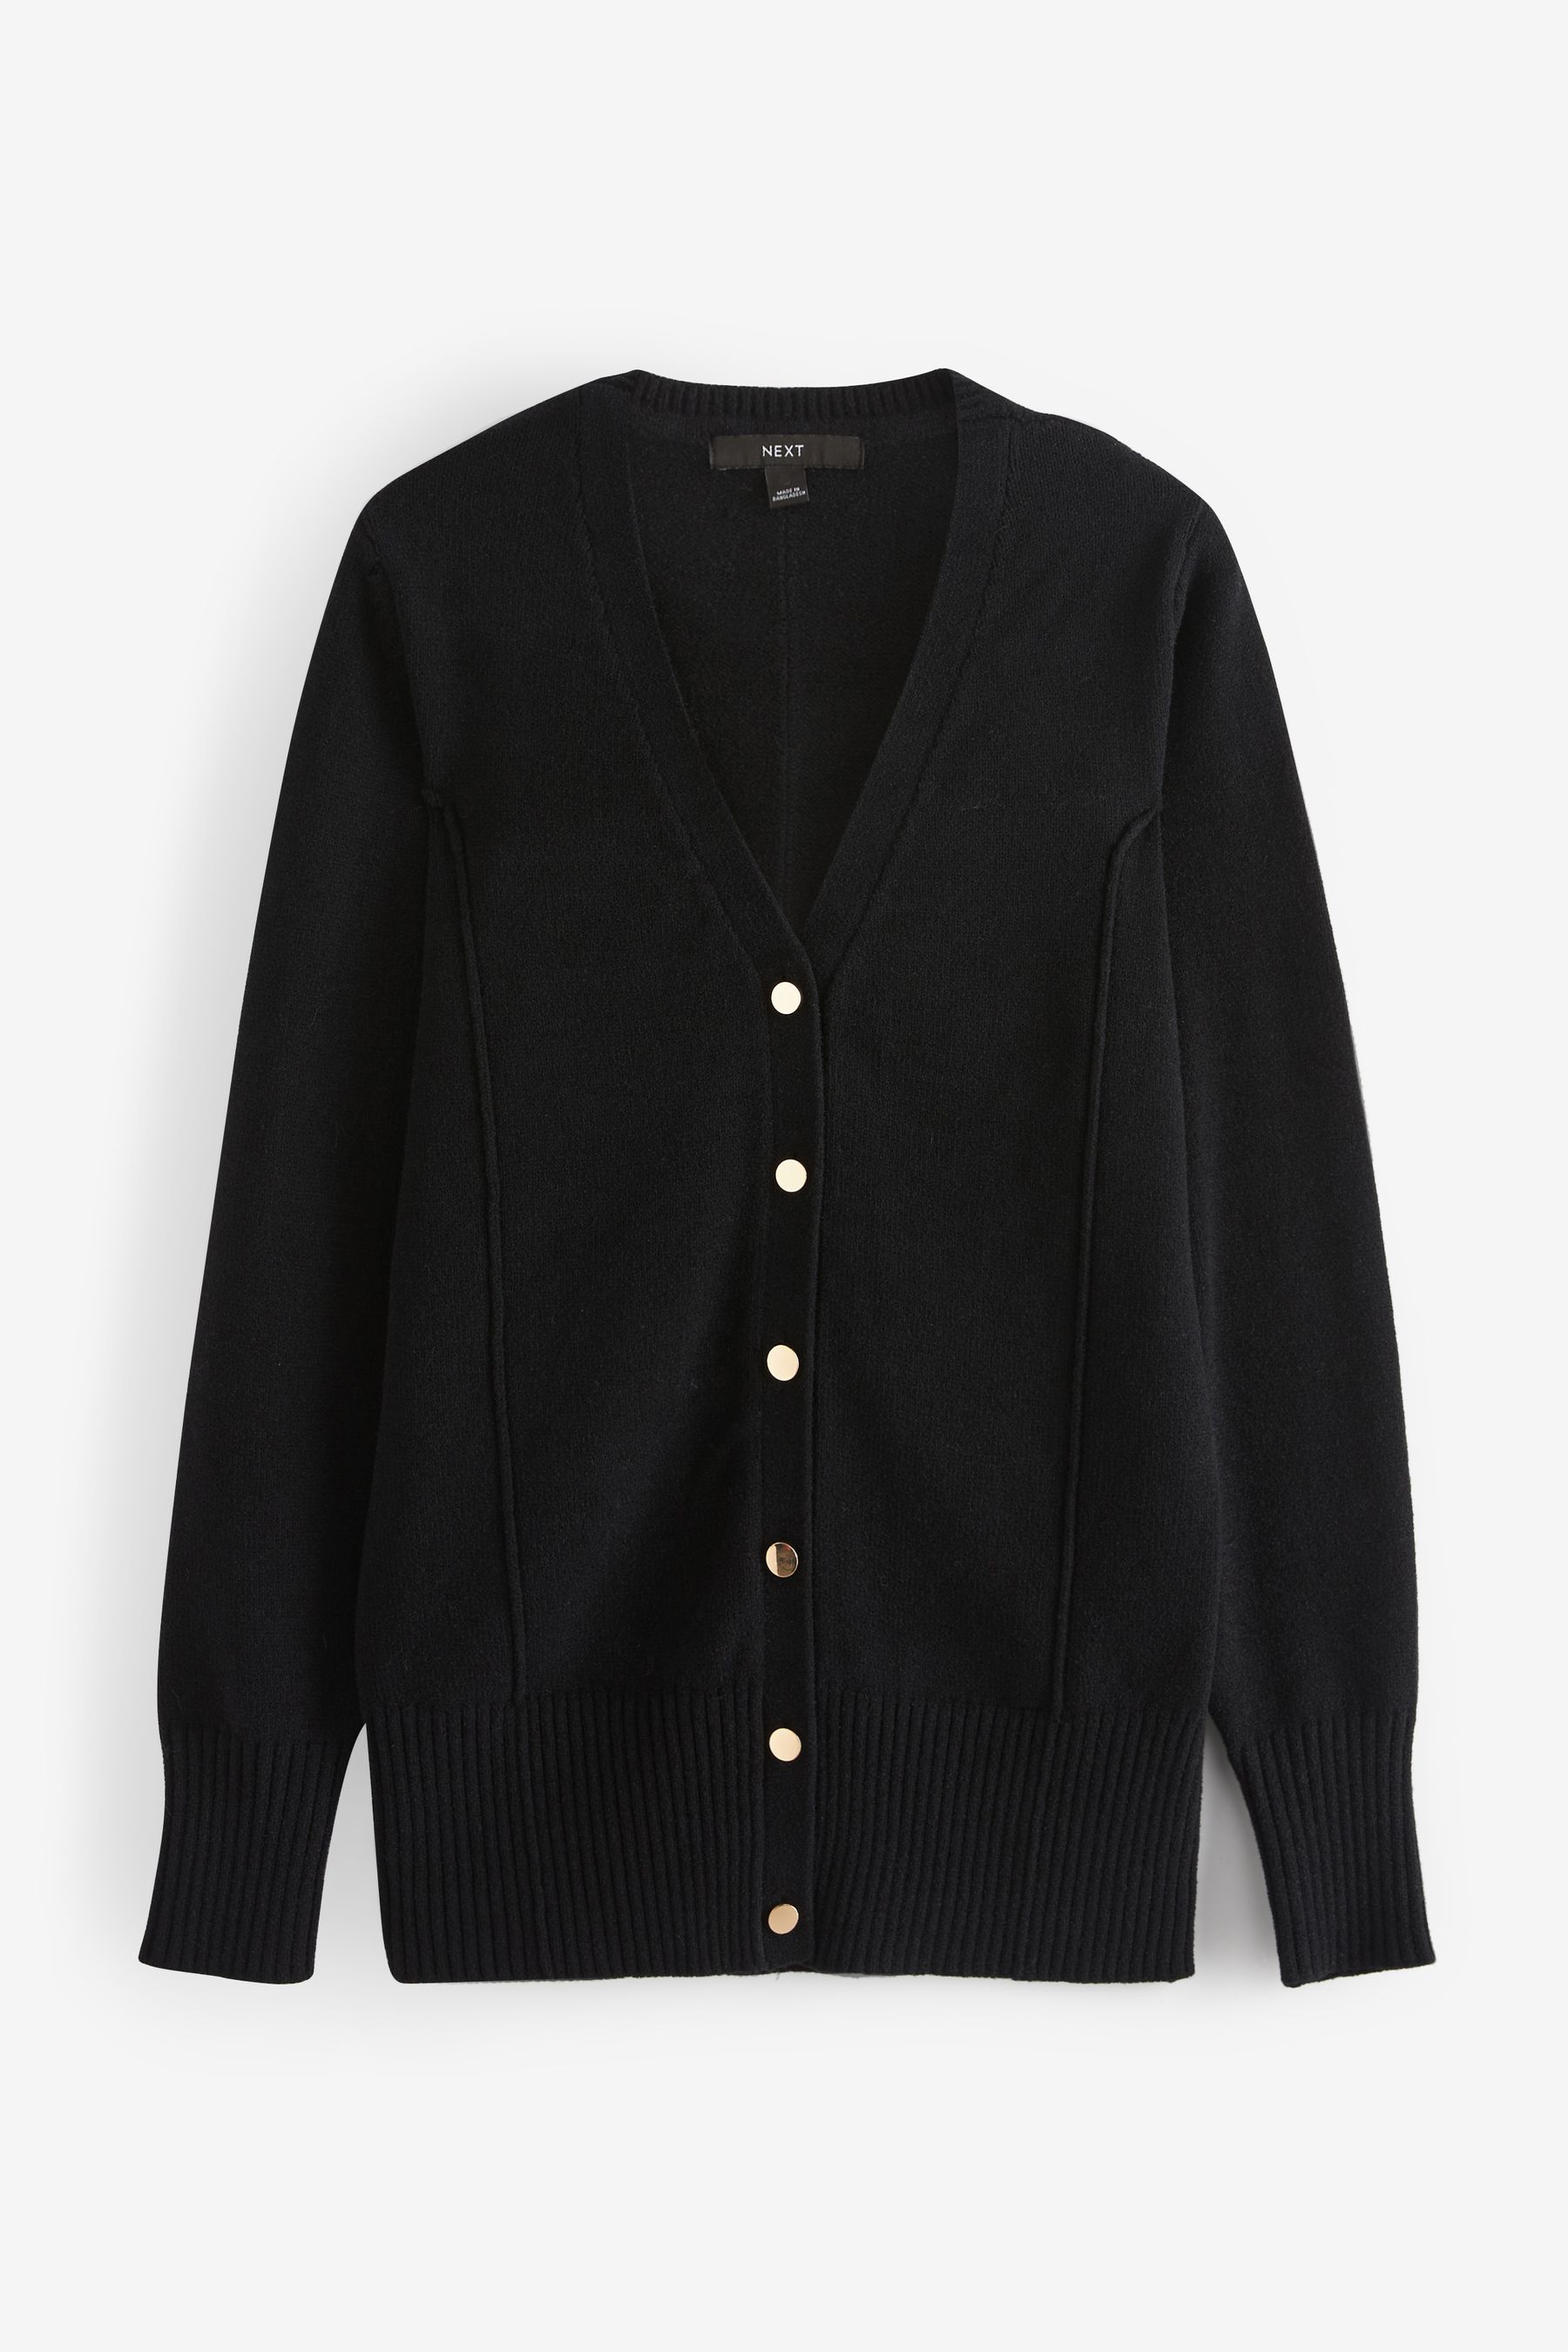 Buy Black Seam Detail Button Up Cardigan from Next Israel